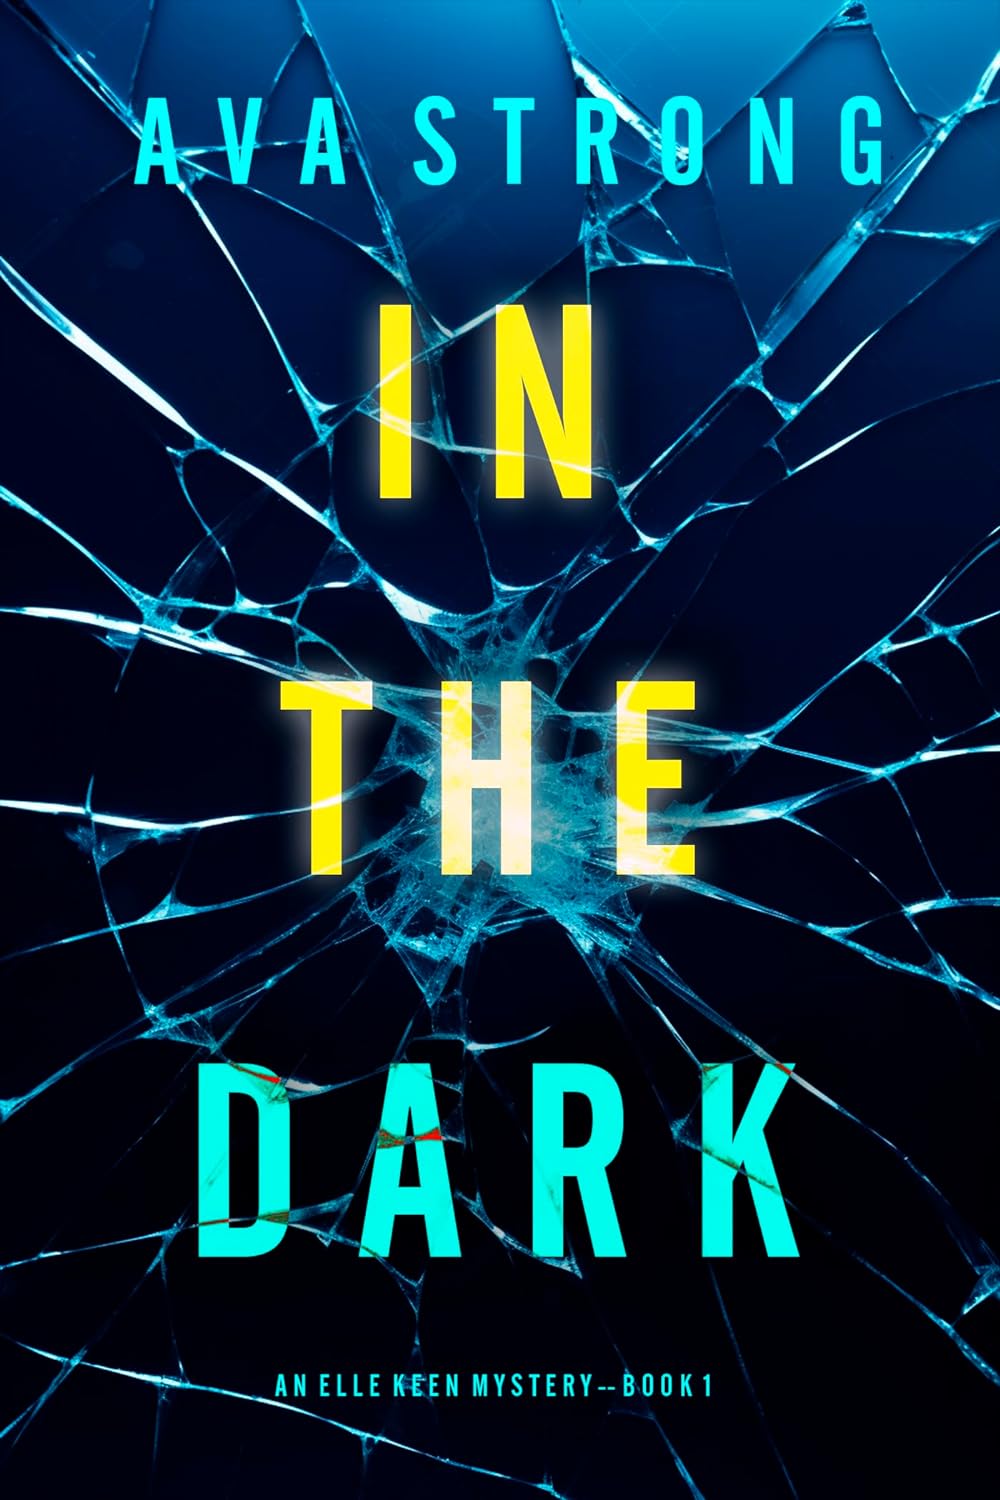 In The Dark FBI Suspense Thriller by Bestselling Author Ava Strong